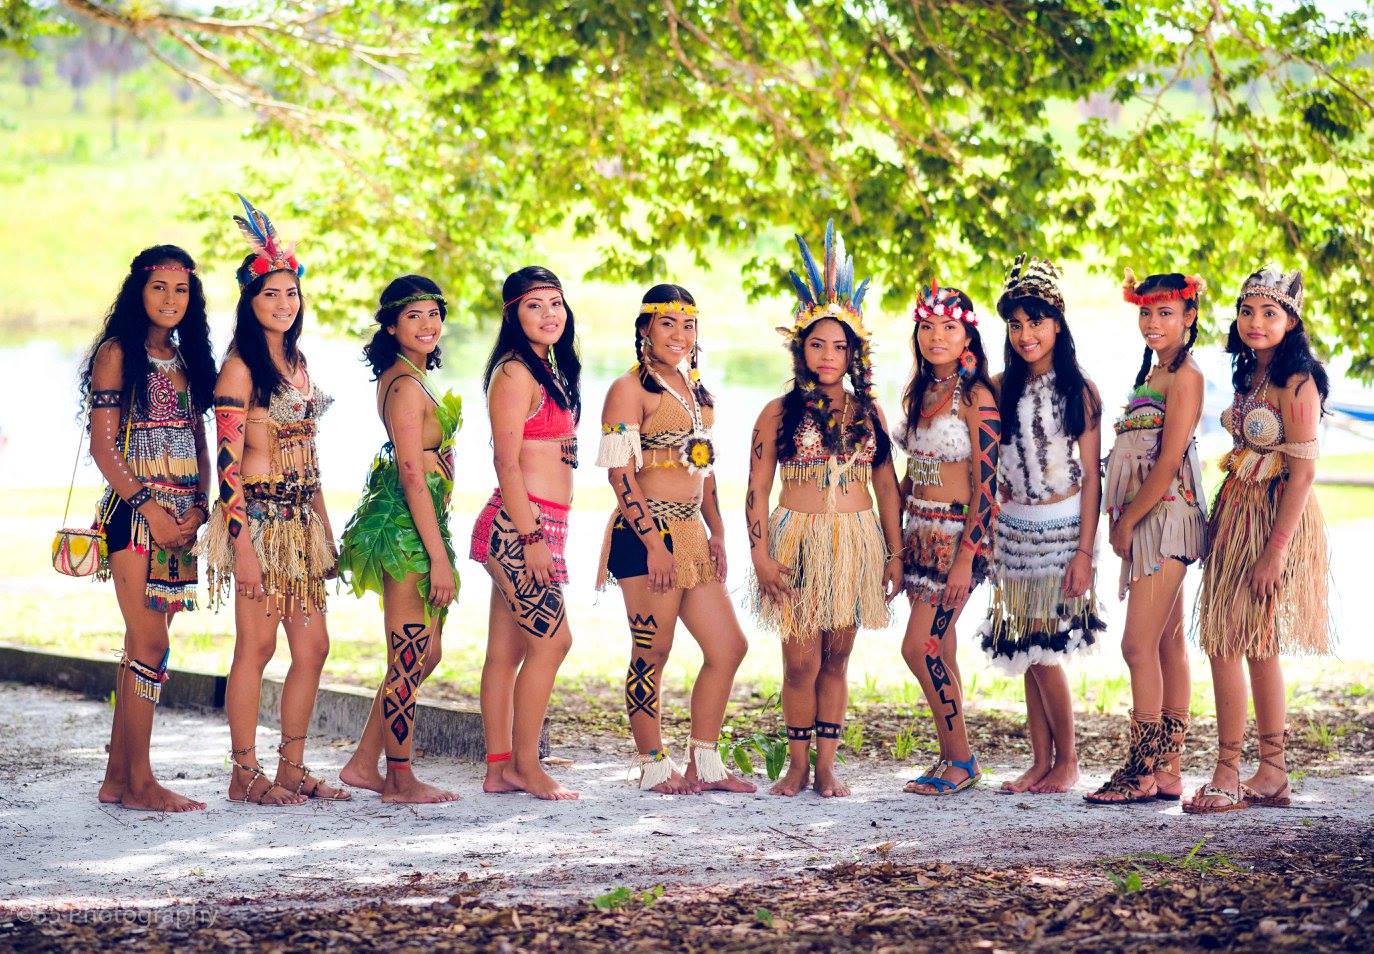 Clash Of Beauty Tradition Expected At Miss Amerindian Heritage Pageant Guyana Times 